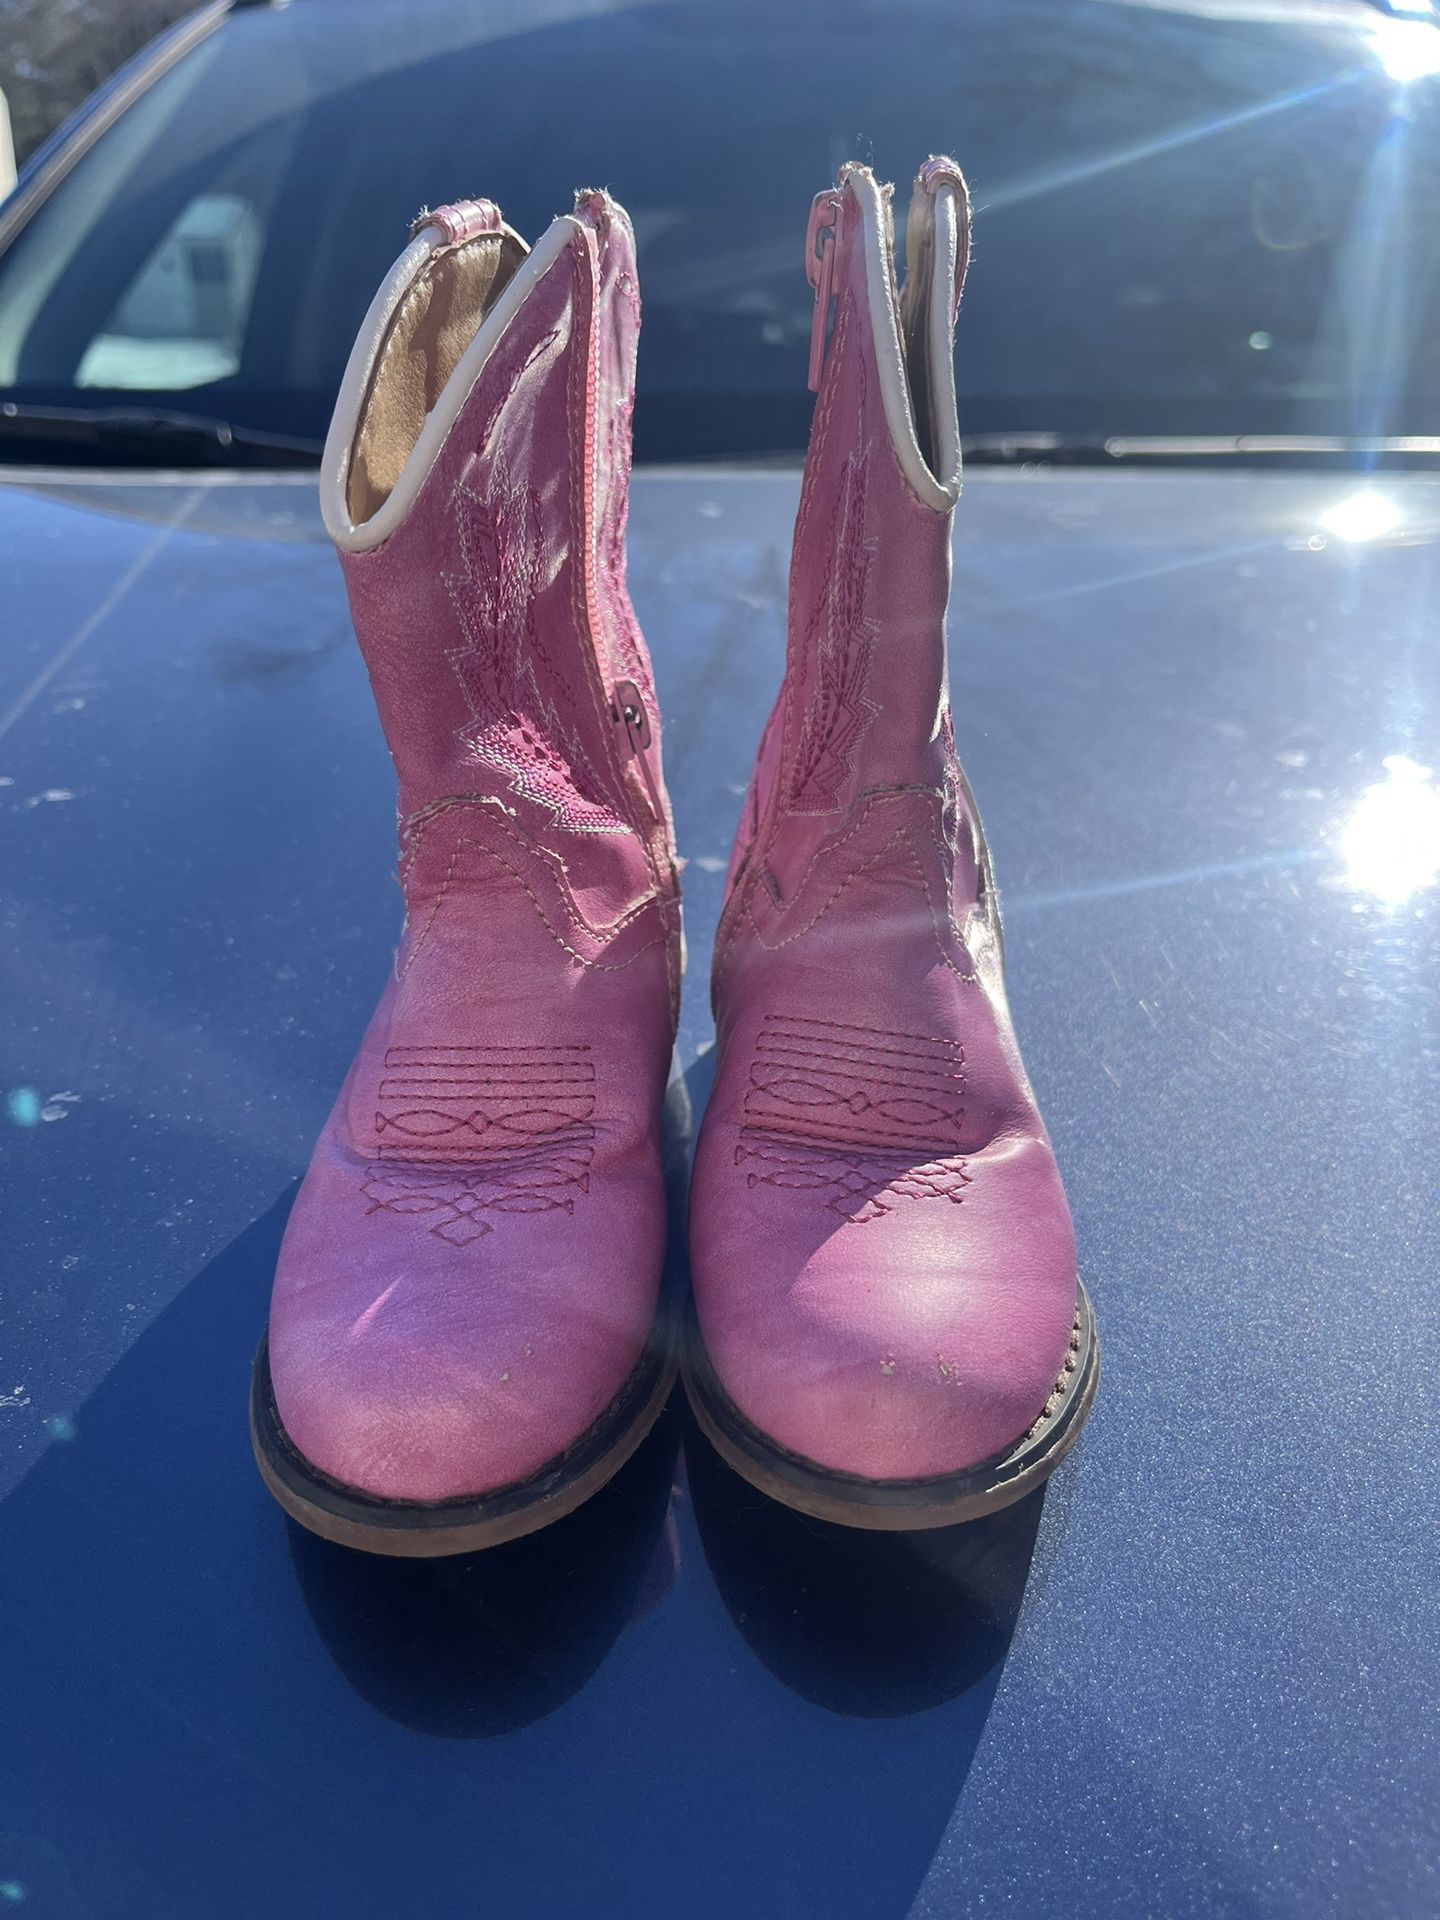 Toddler Girls Size 7 Cowgirl Boots